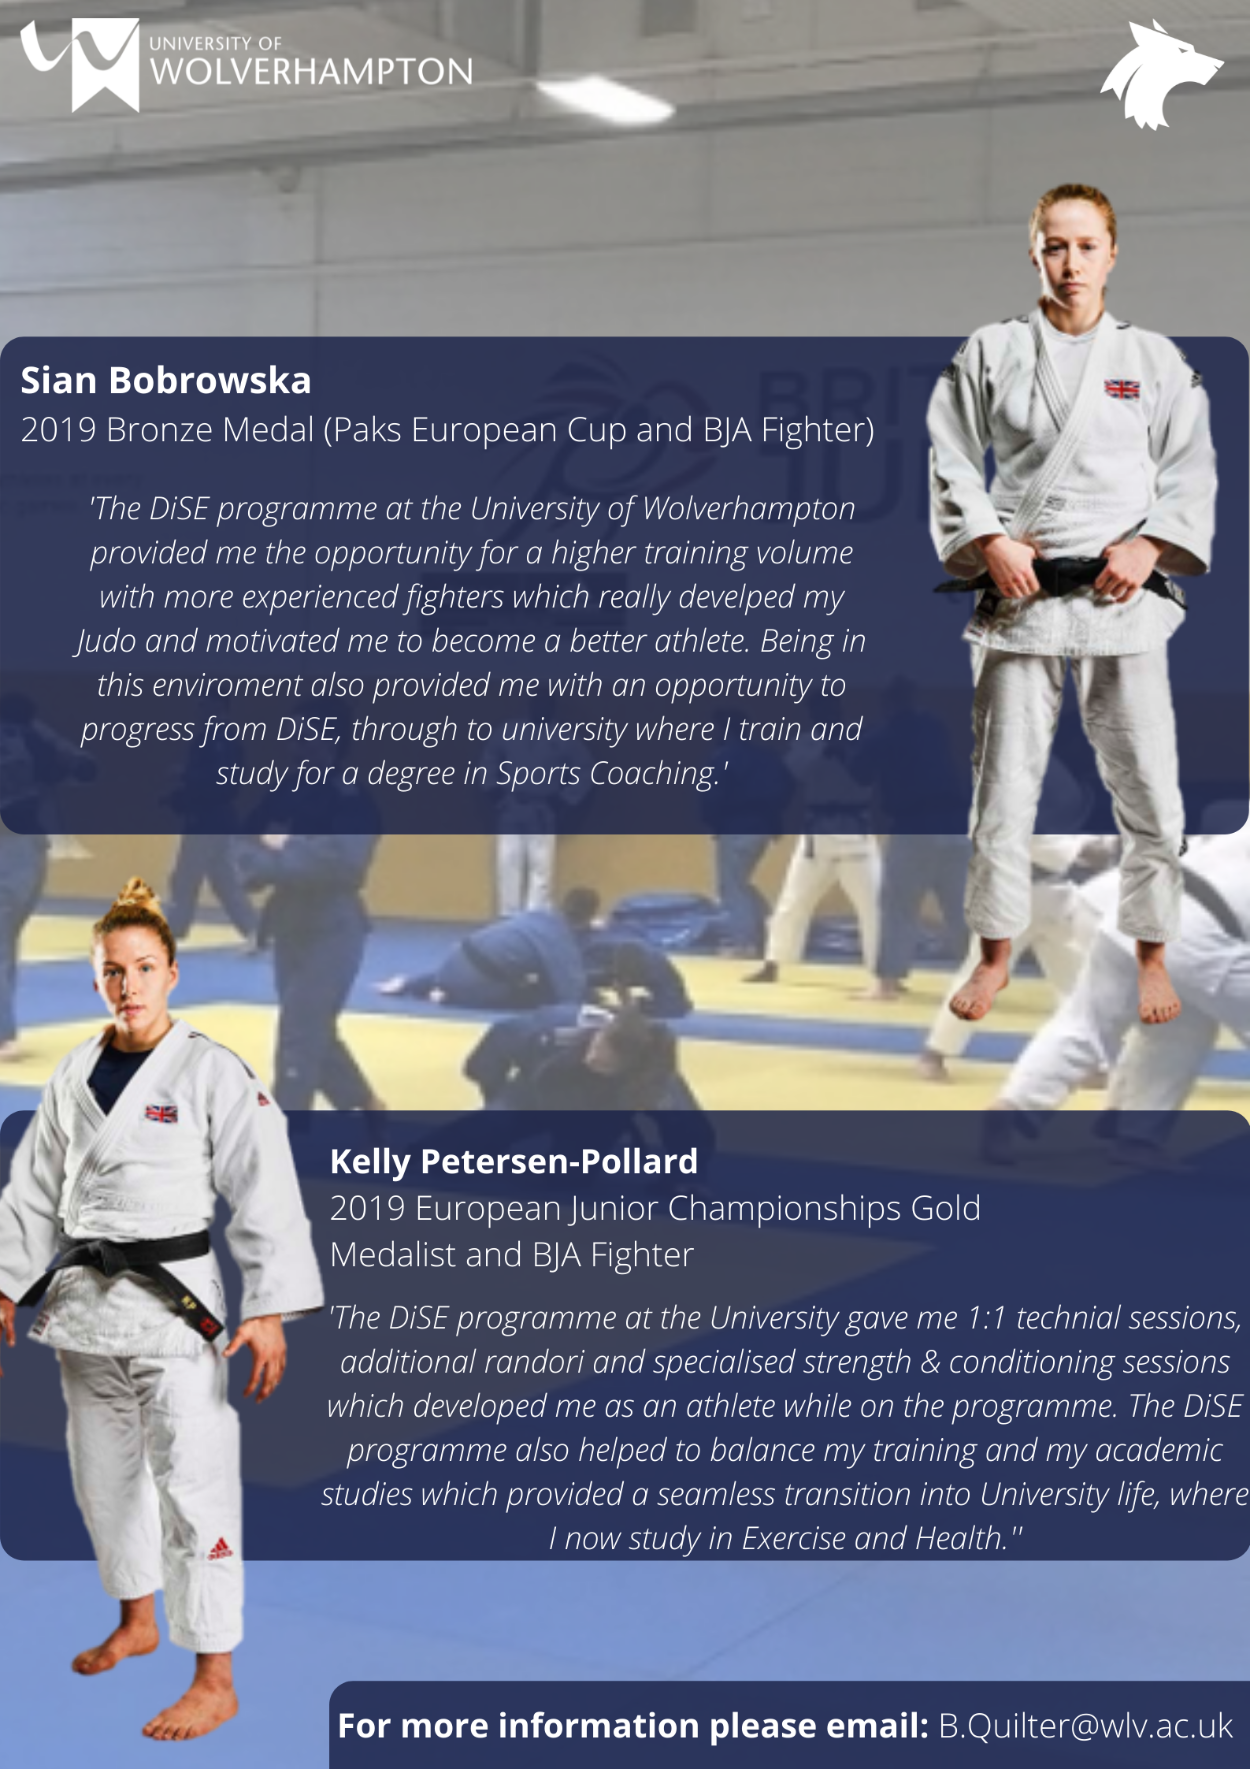 Diploma in Sporting Excellence graphic with accounts from award-winning judo practitioners Sian Bobrowska and Kelly Petersen-Pollard